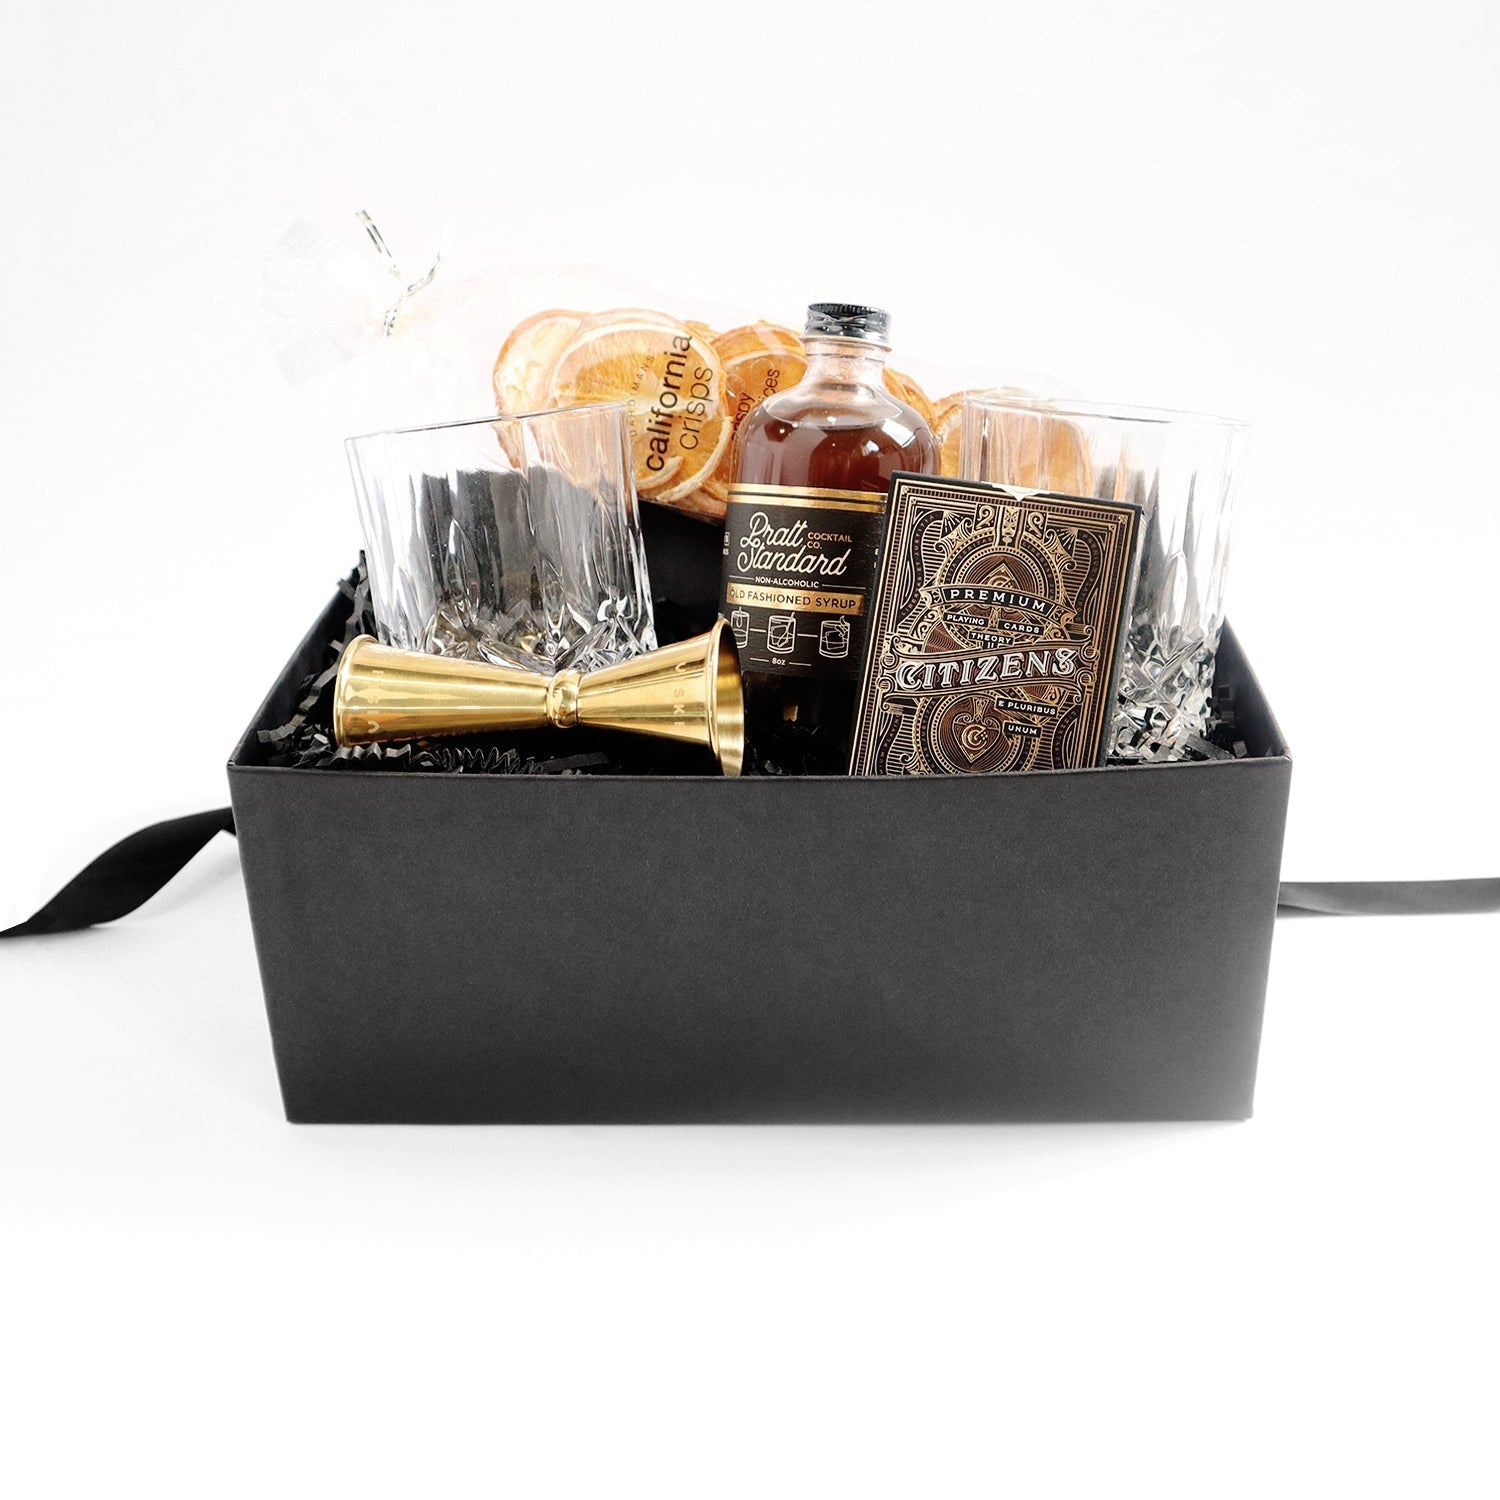 Black box with a set of two crystal tumblers, a double sided golden jigger, bottle of old fashioned syrup with black and gold label, a pack of playing cards  with elaborate gold and bronze foil design, pack of dried oranges.